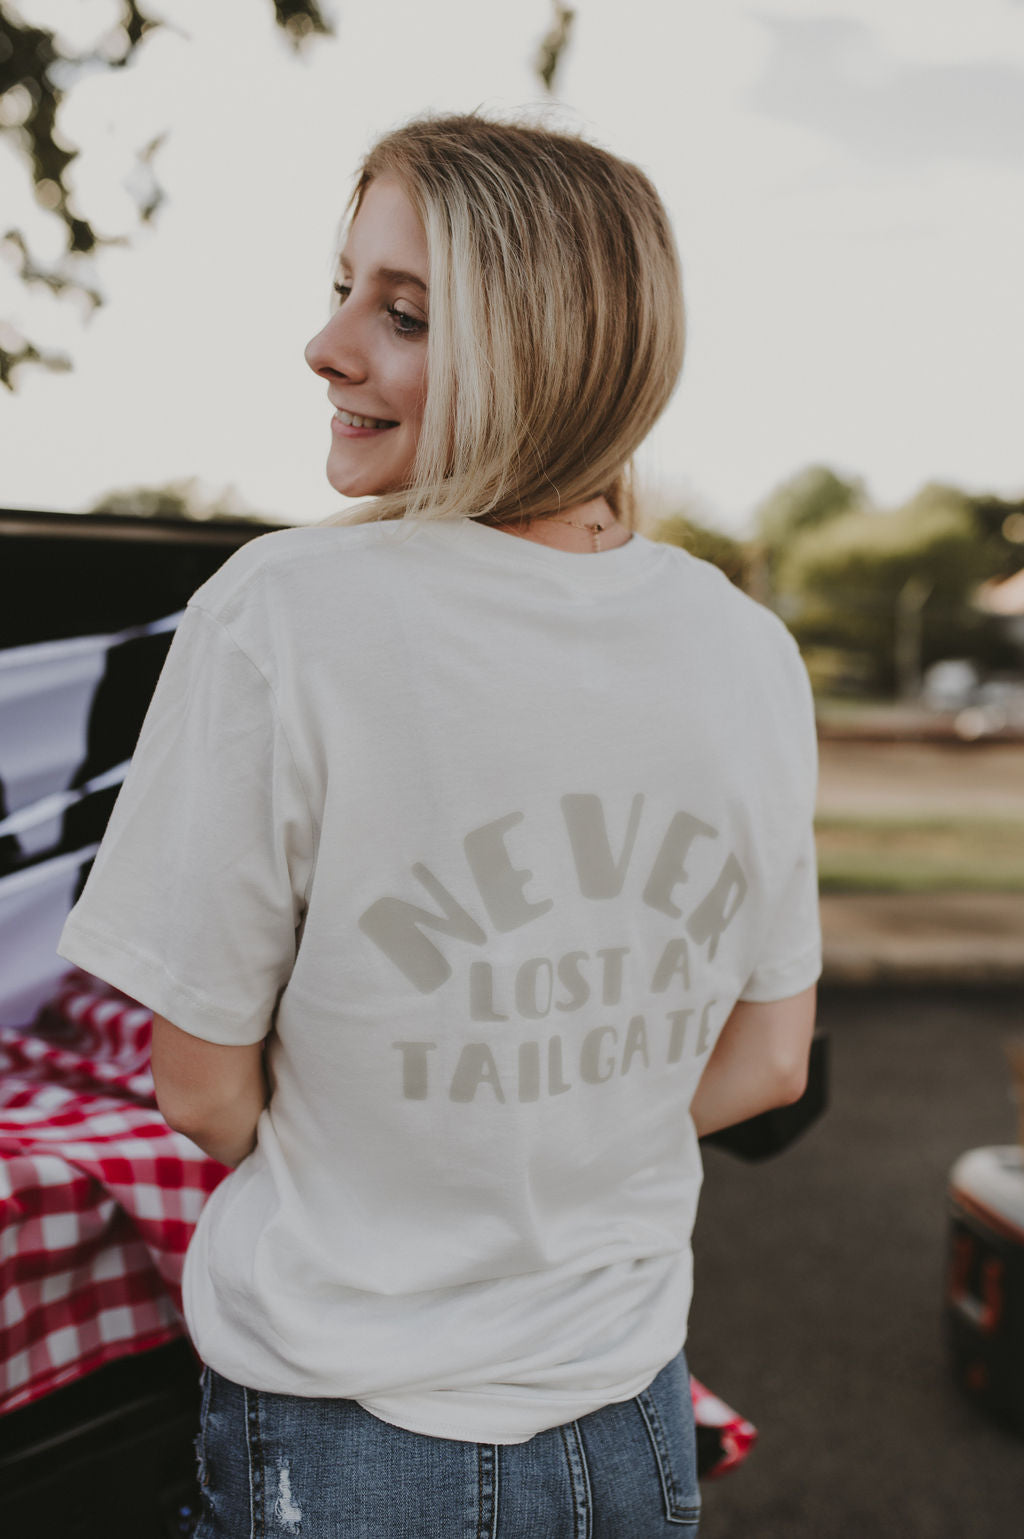 Never Lost A Tailgate Tee